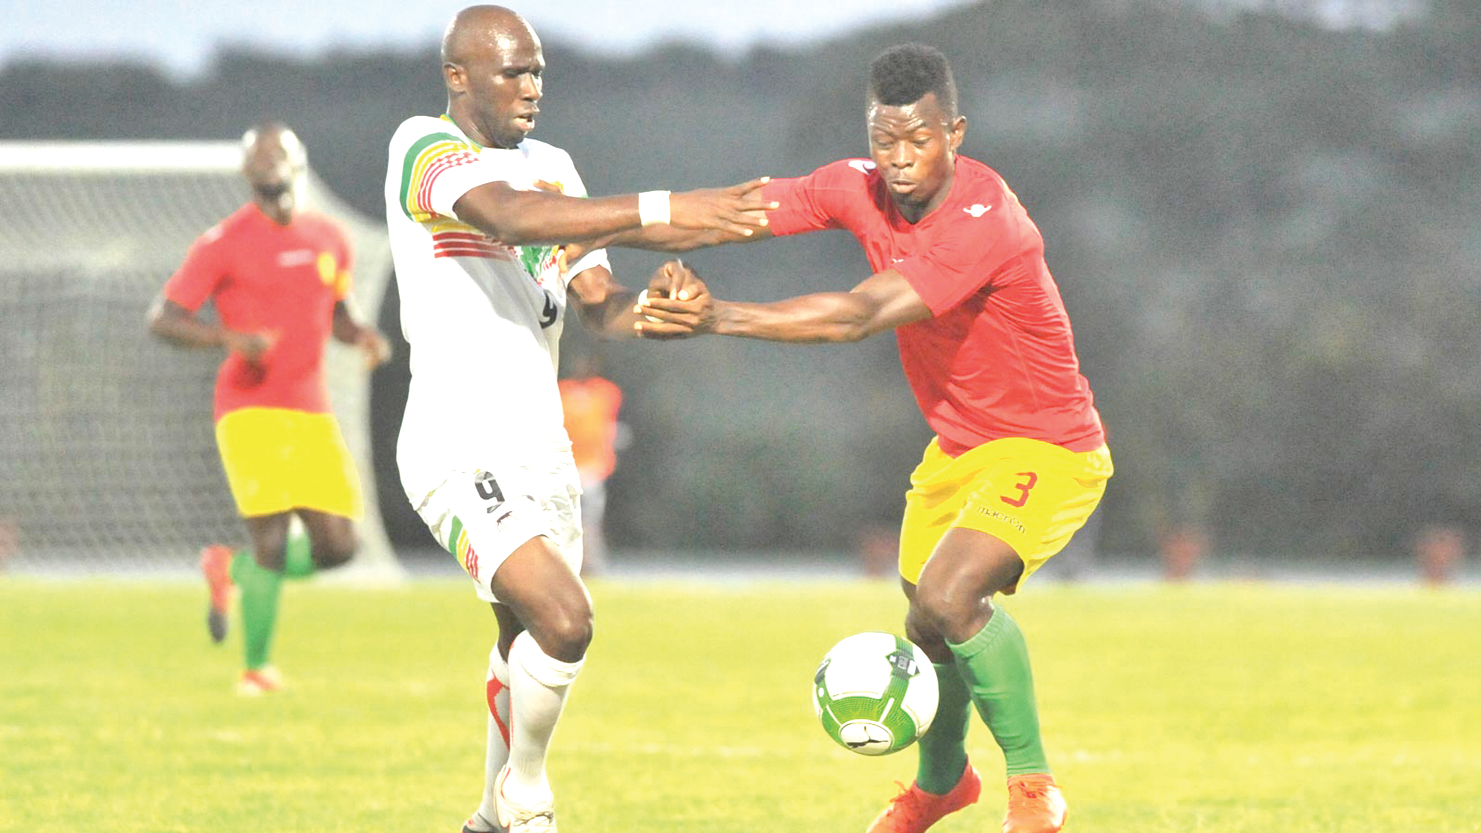 Guinea’s Ismael Sylla (right) gains the upper hand over Malian forward, Oumar Kida, during a challenge for the ball in yesterday’s clash at Elmina